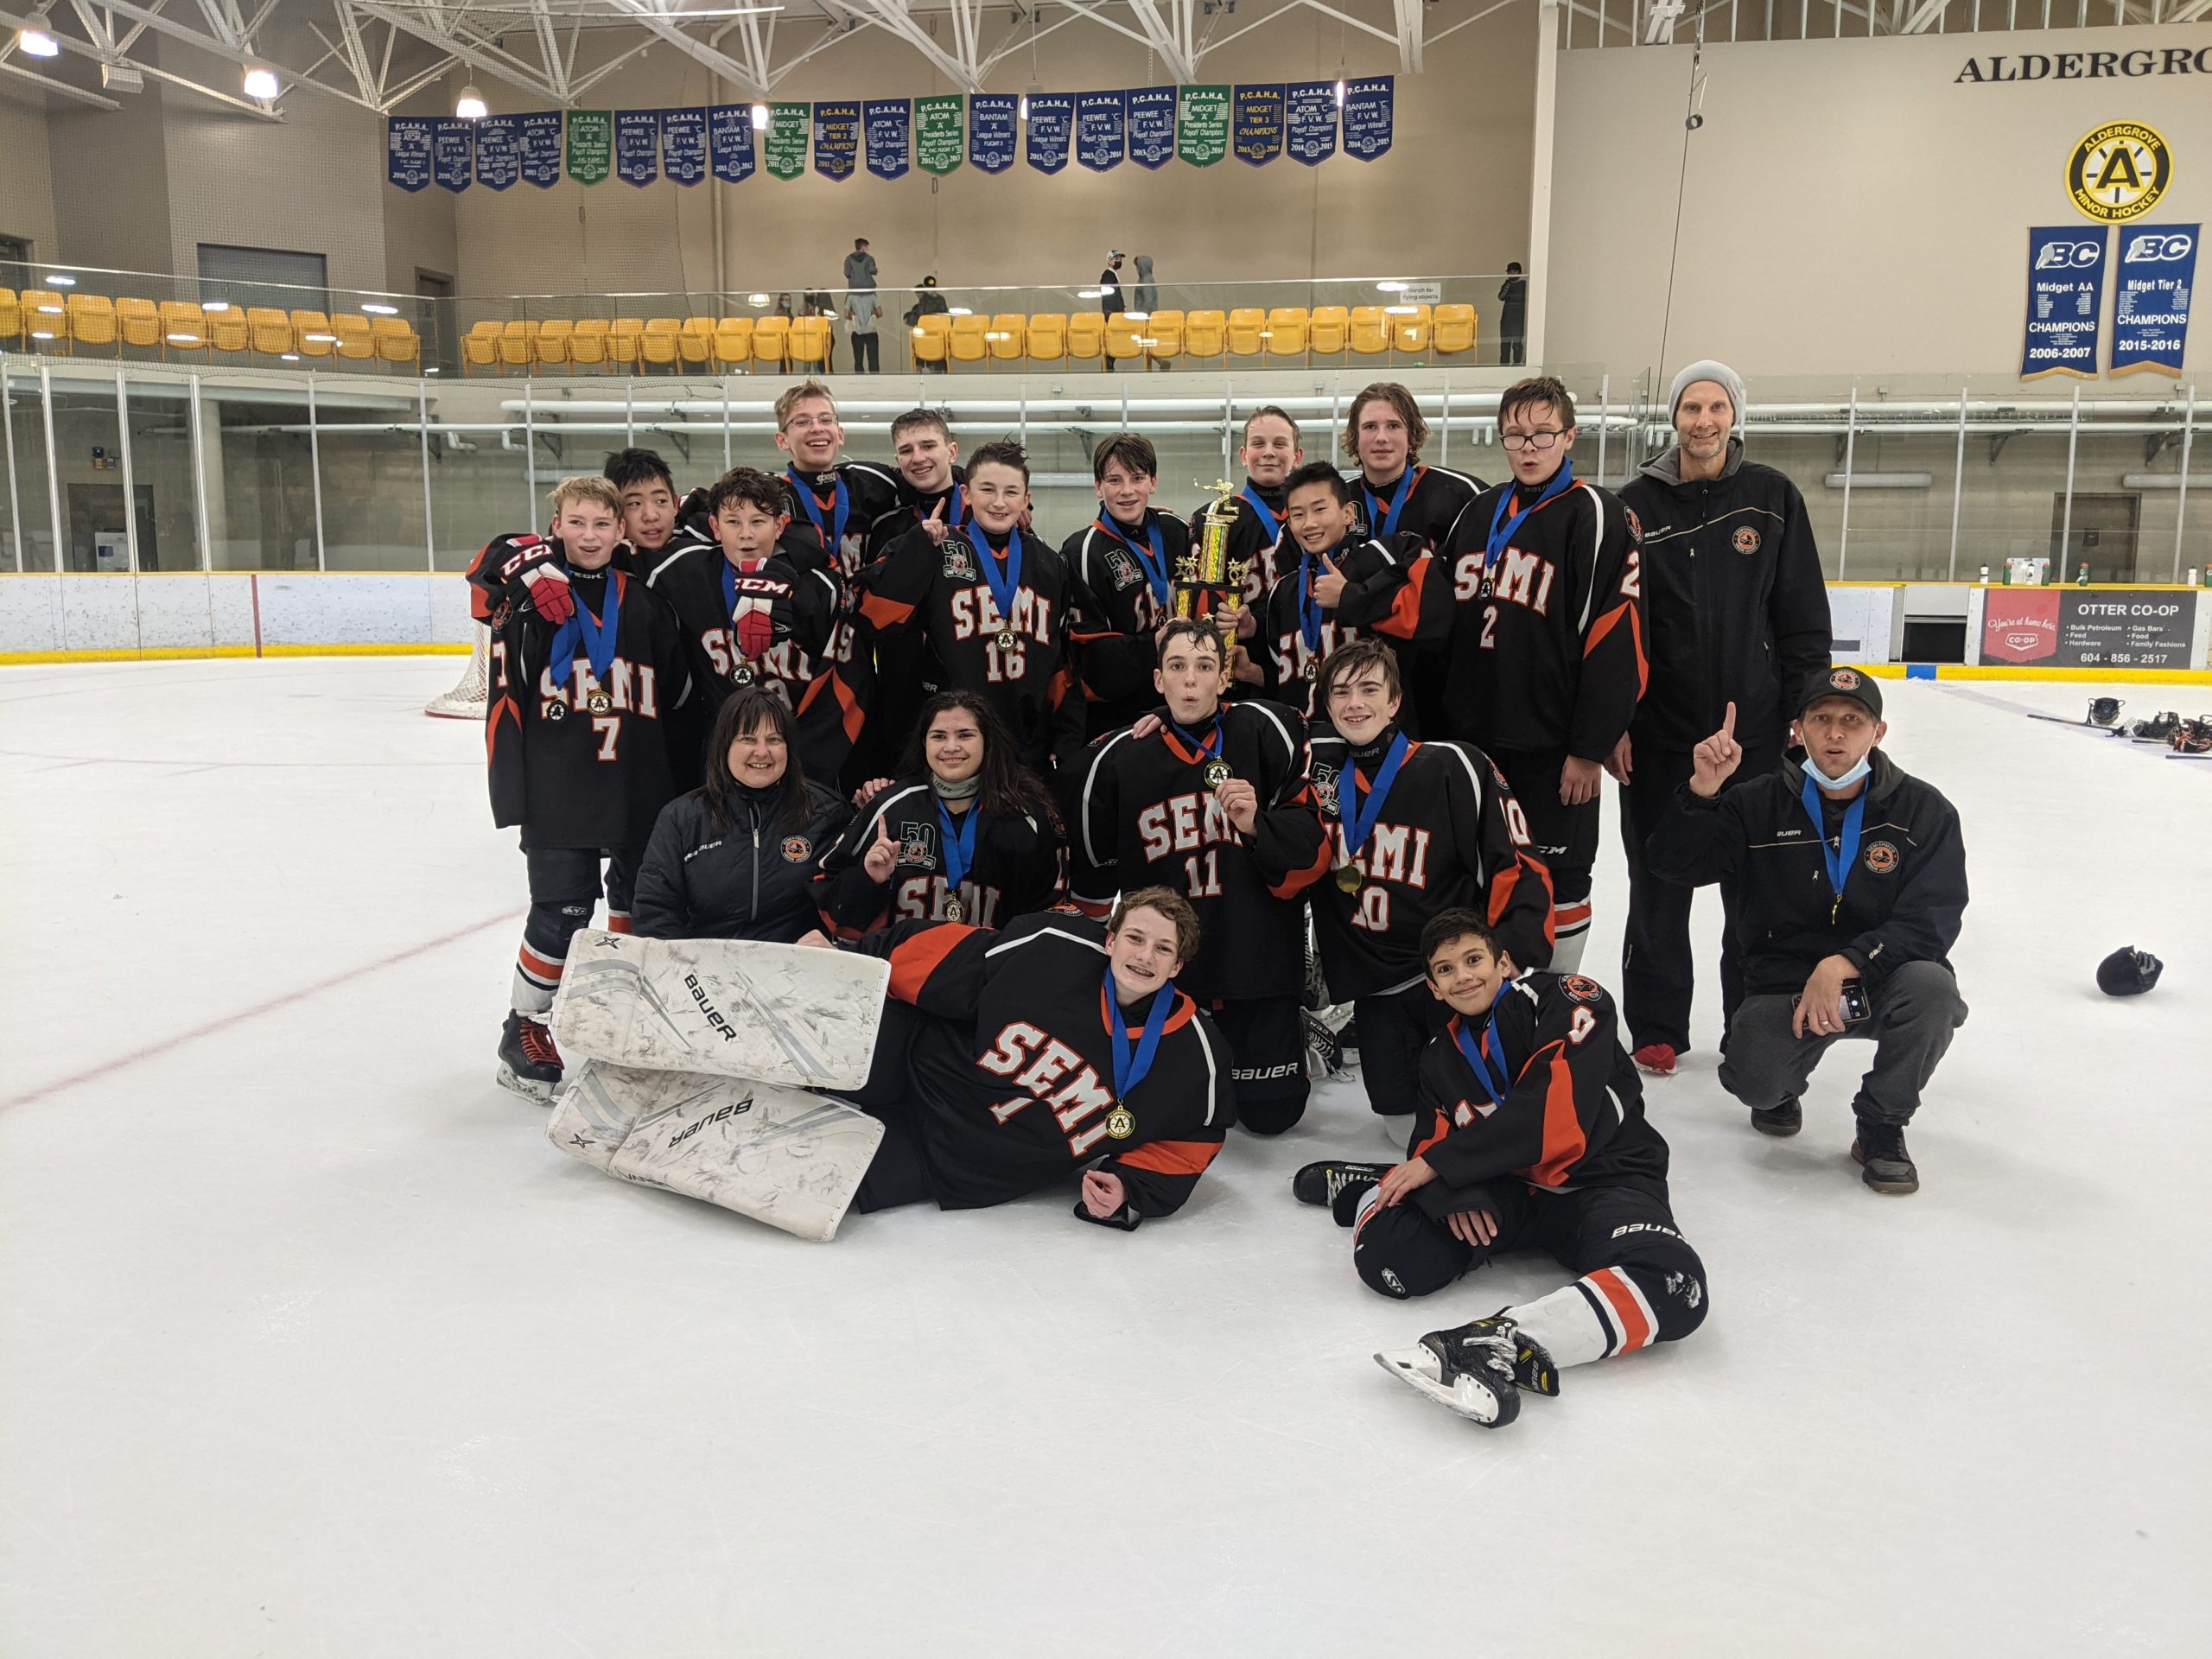 October 24th, 2021 - U15 C3 brings home the GOLD from the Aldergrove U15 tournament. Way to go team!